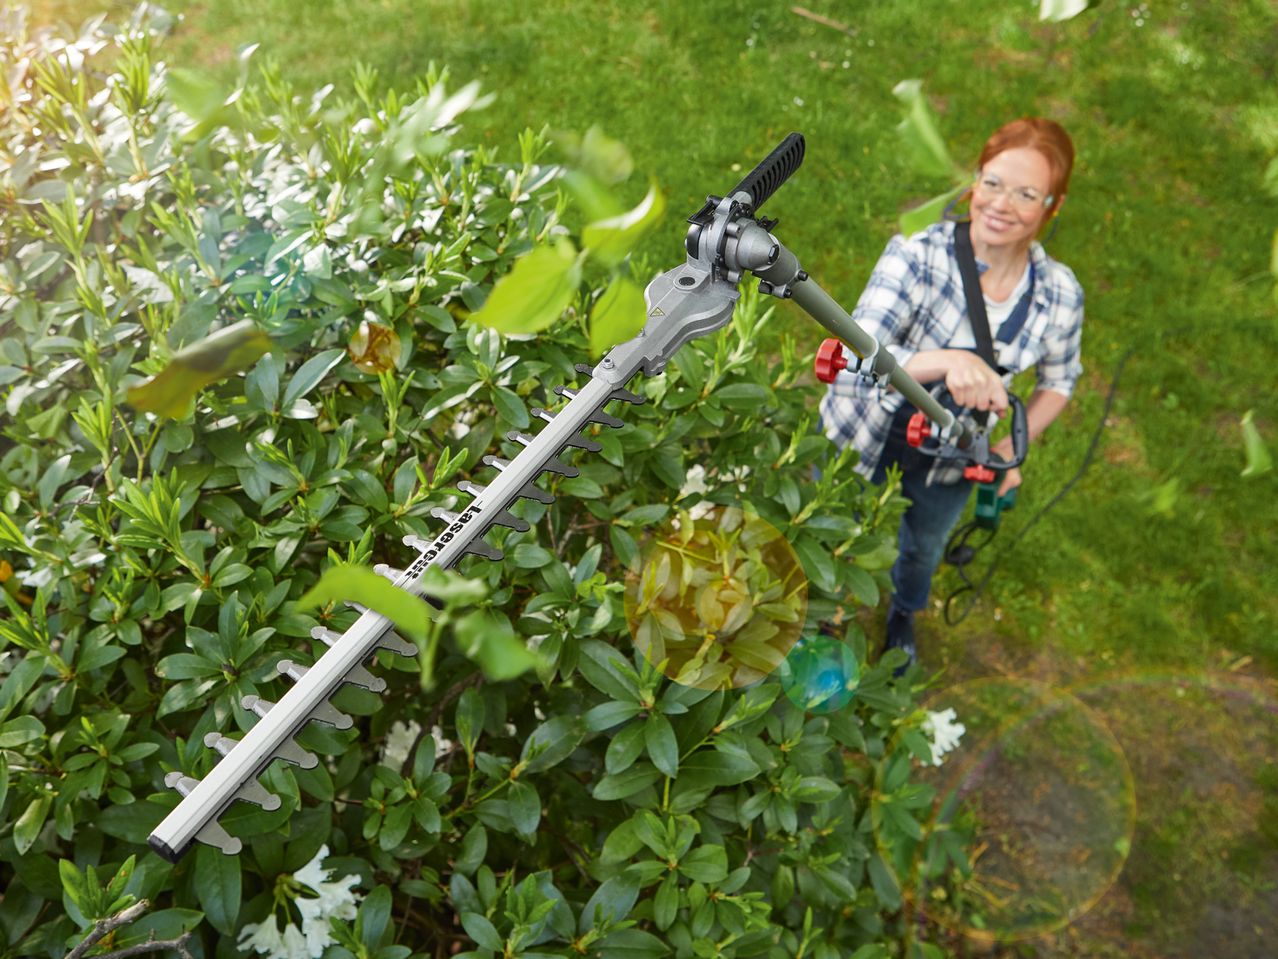 Go to full screen view: Electric Long-Reach Hedge Trimmer - Image 8